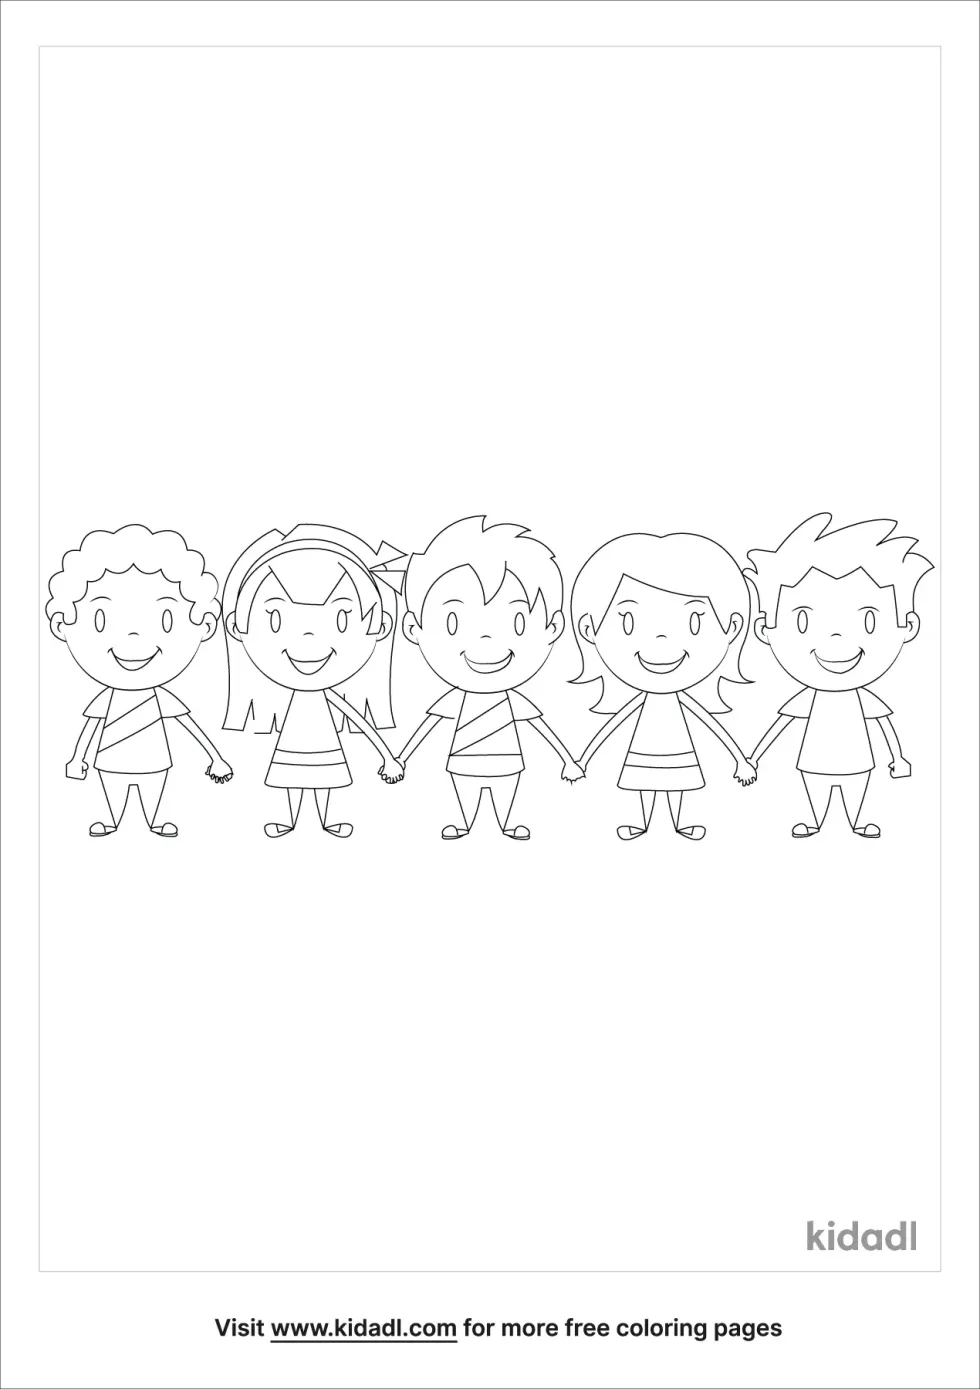 Five Friends Coloring Page